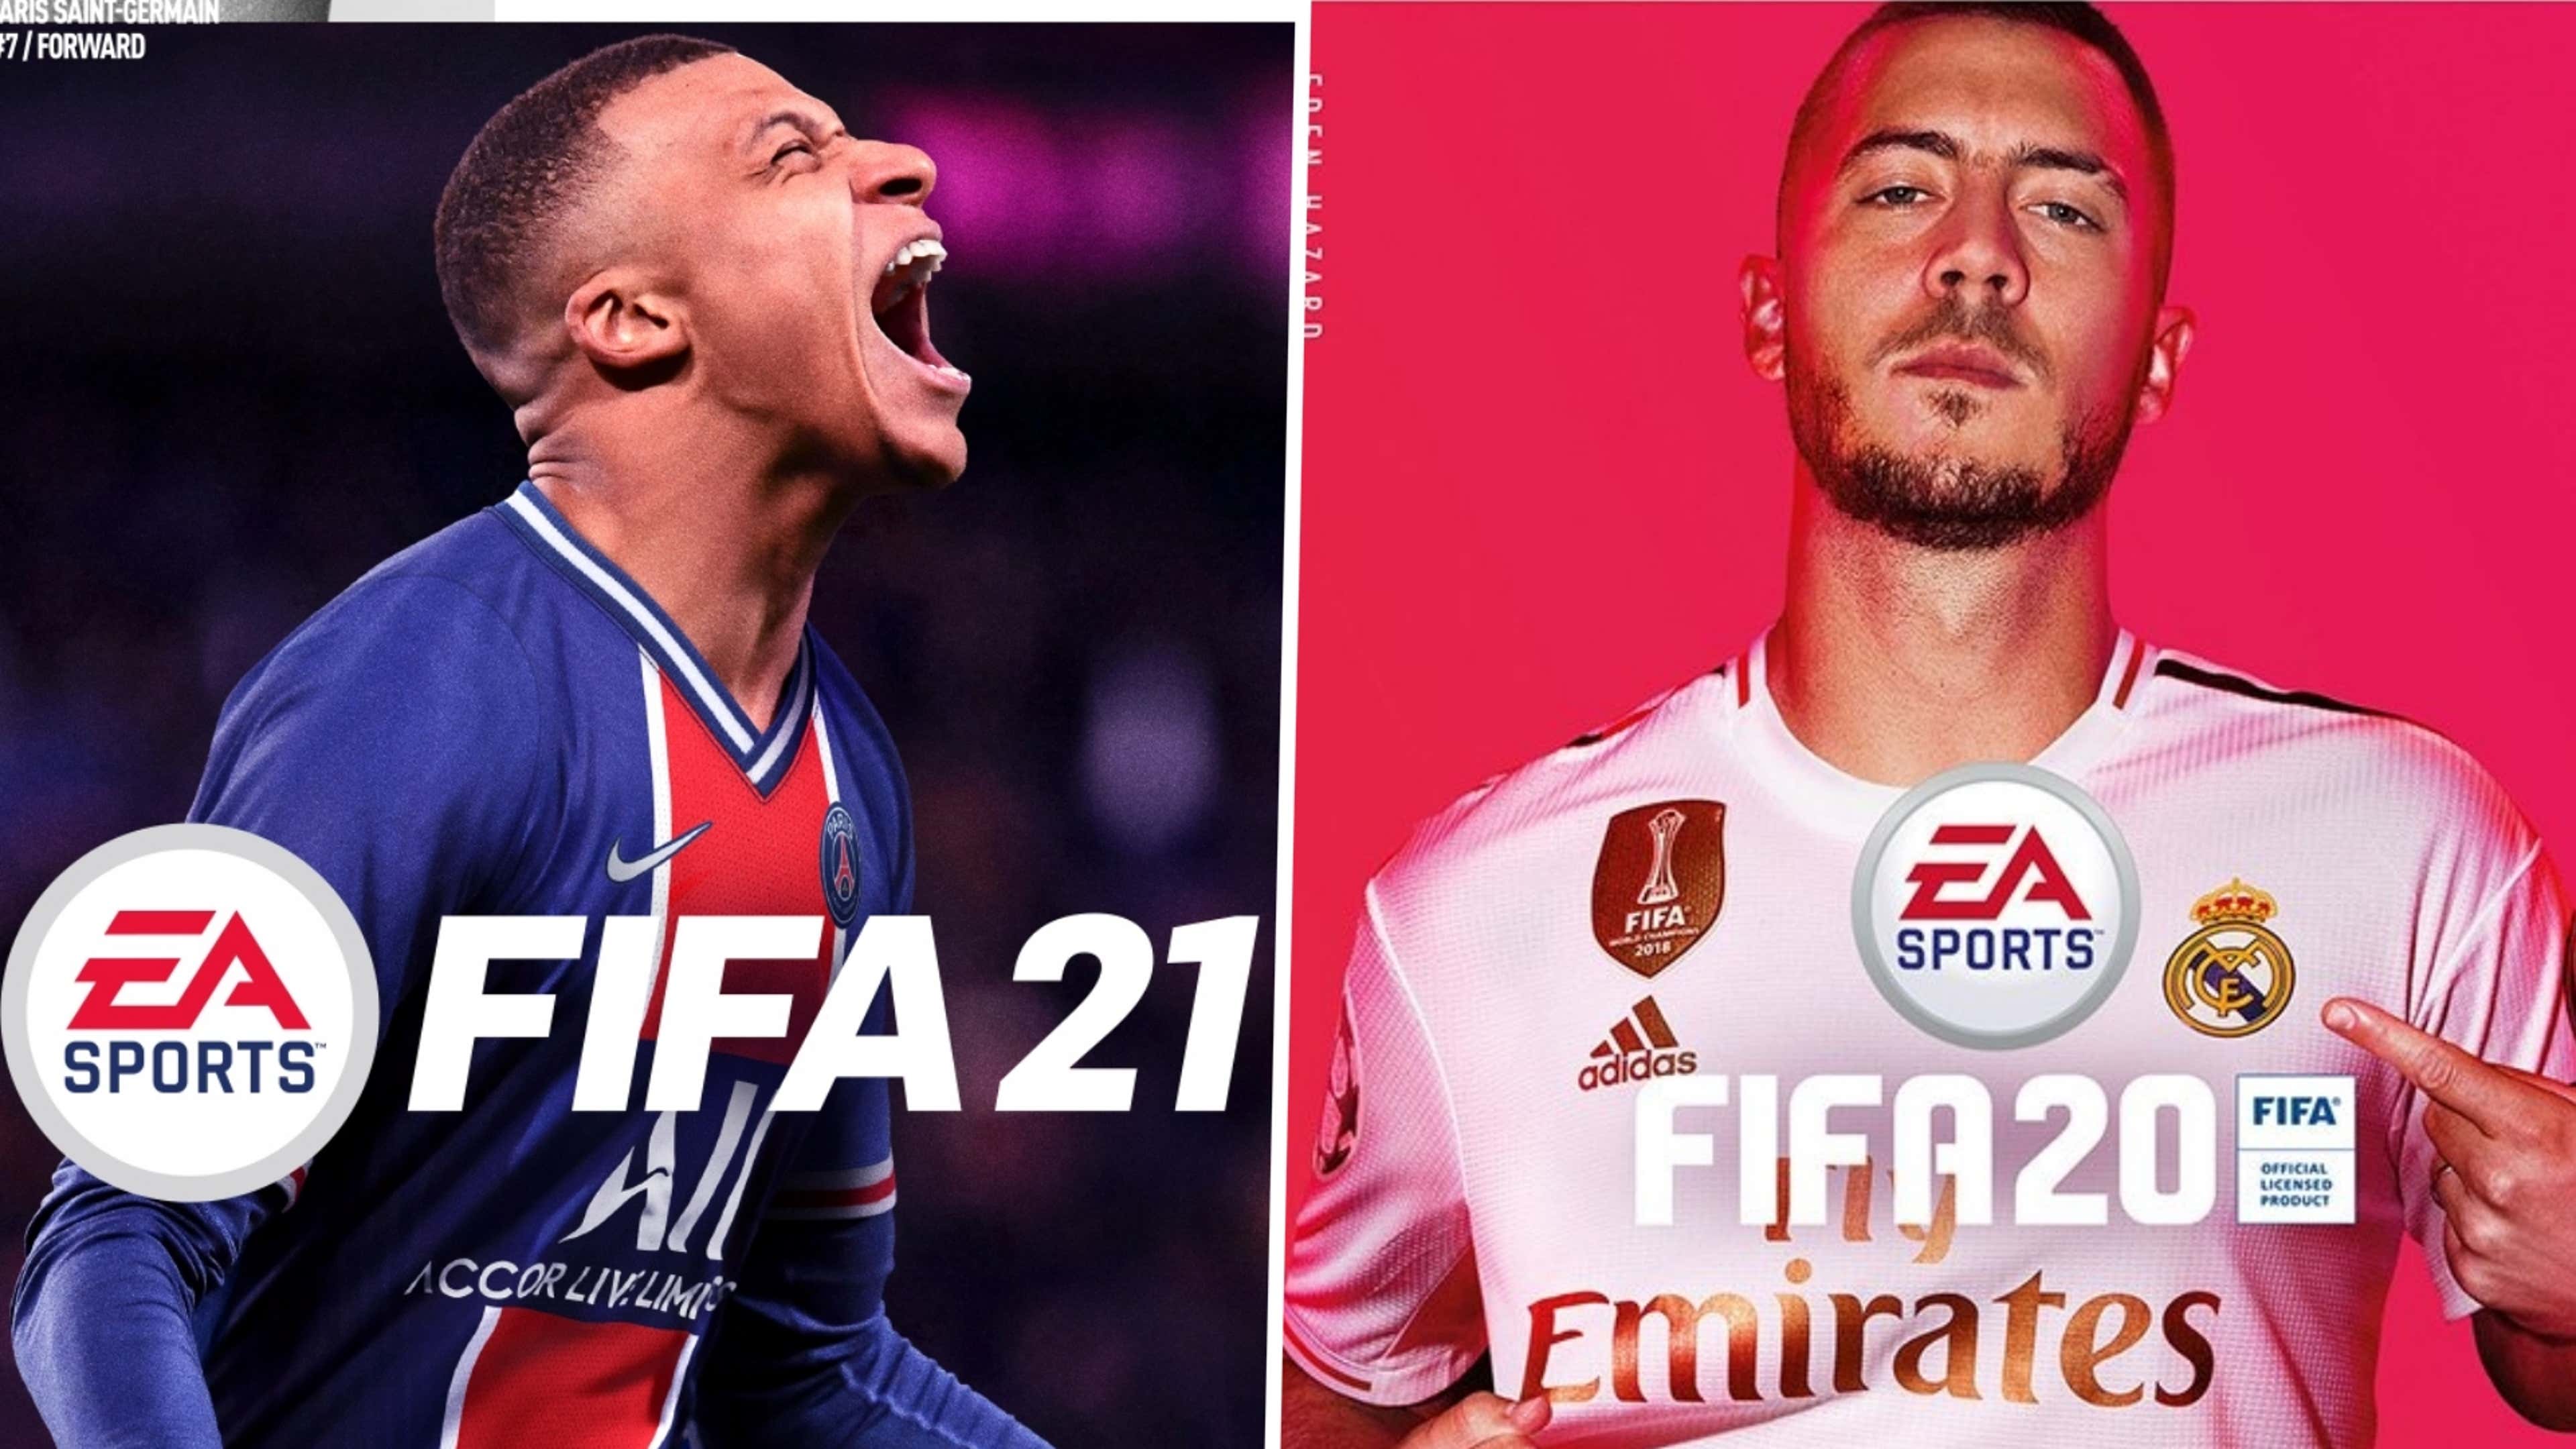 leksikon meditation gave Is FIFA 21 better than FIFA 20? Review average and game differences |  Goal.com US